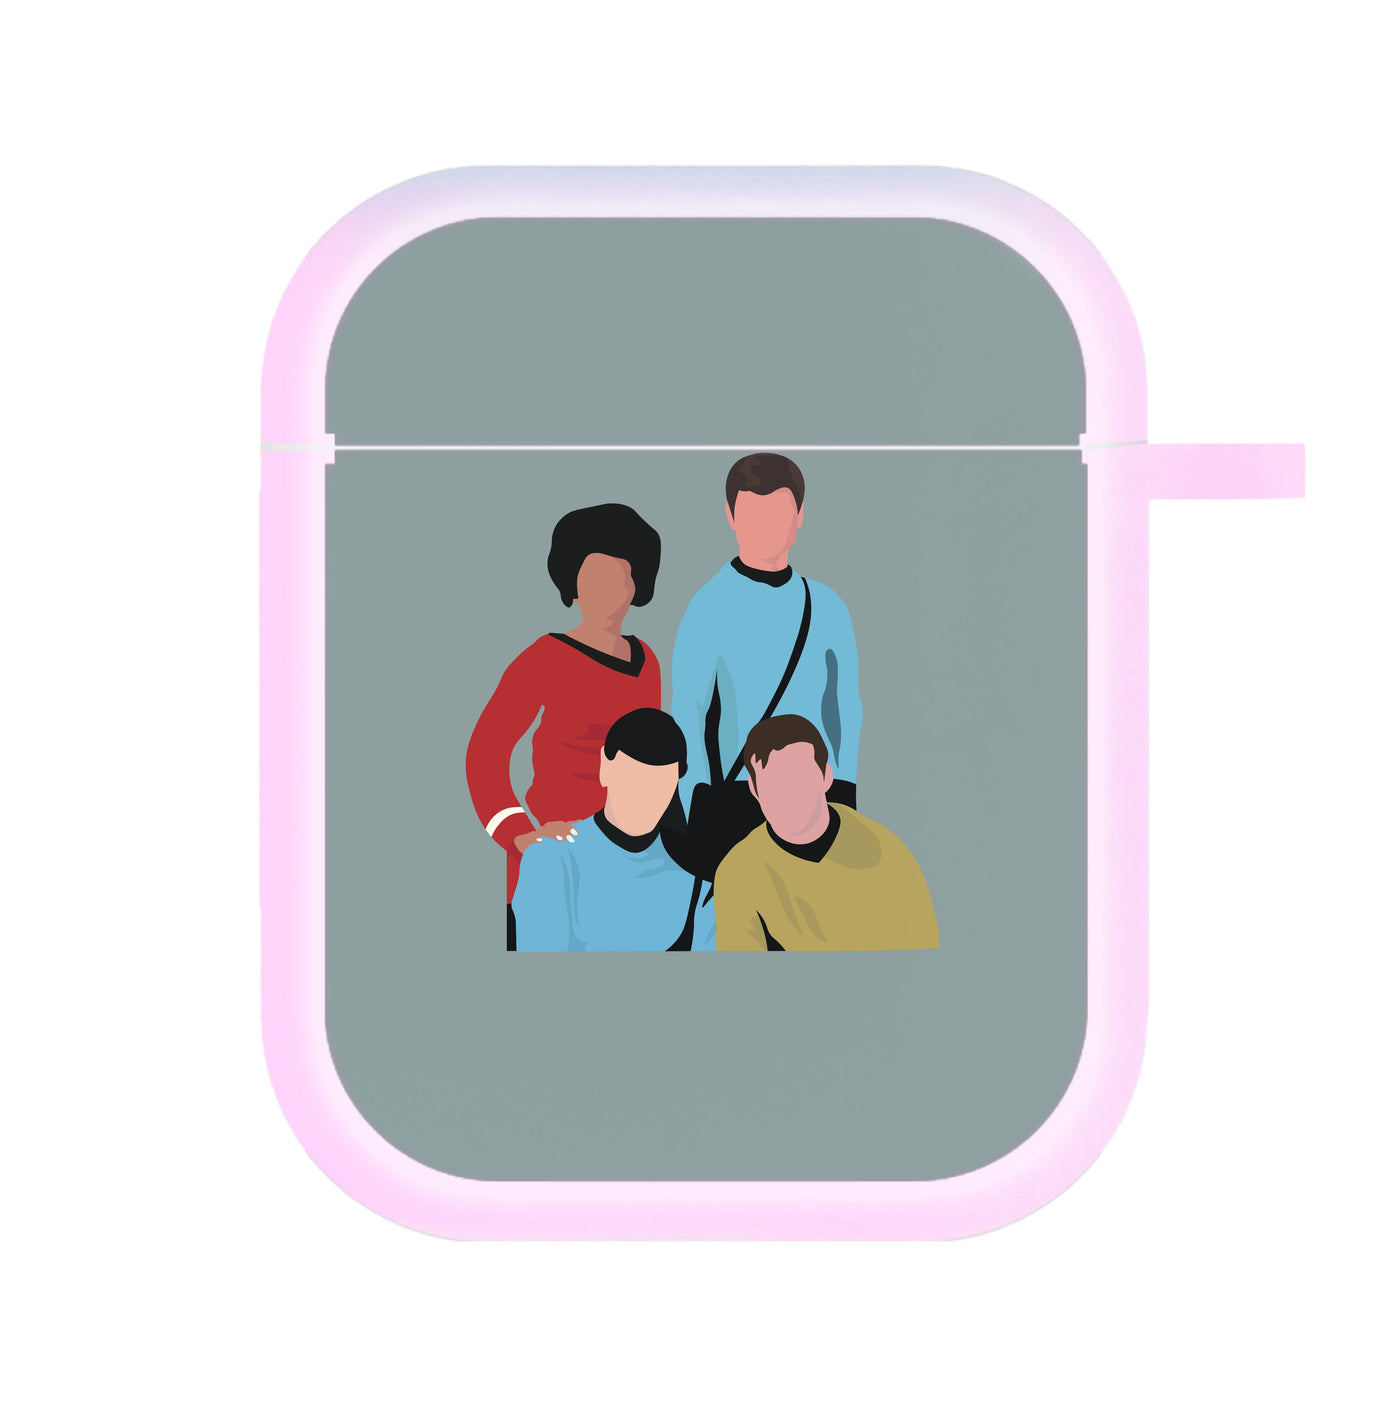 Characters - Star Trek AirPods Case